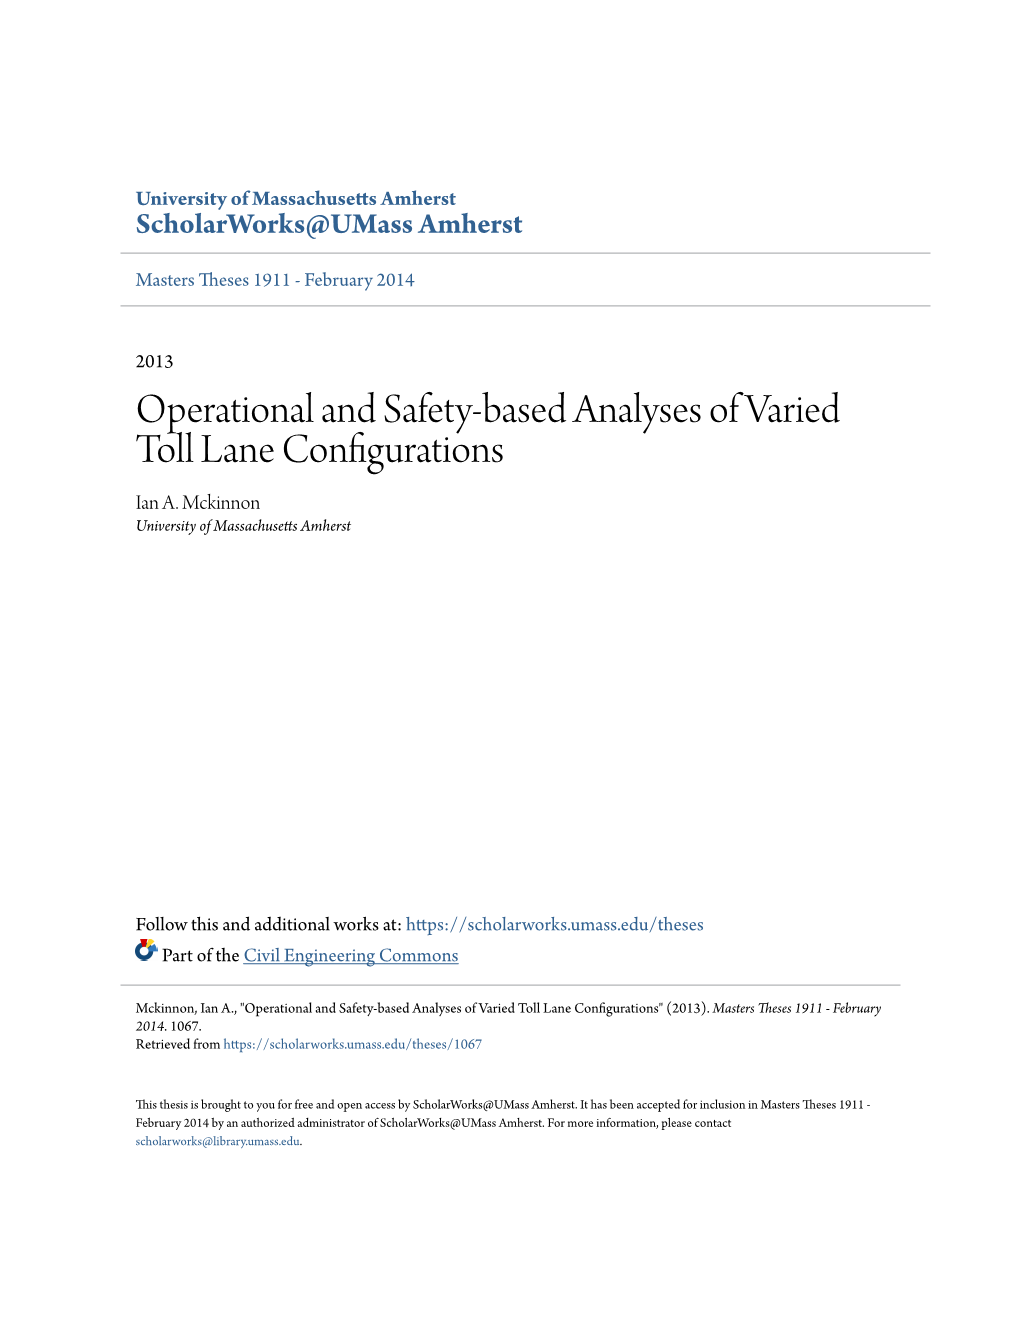 Operational and Safety-Based Analyses of Varied Toll Lane Configurations Ian A